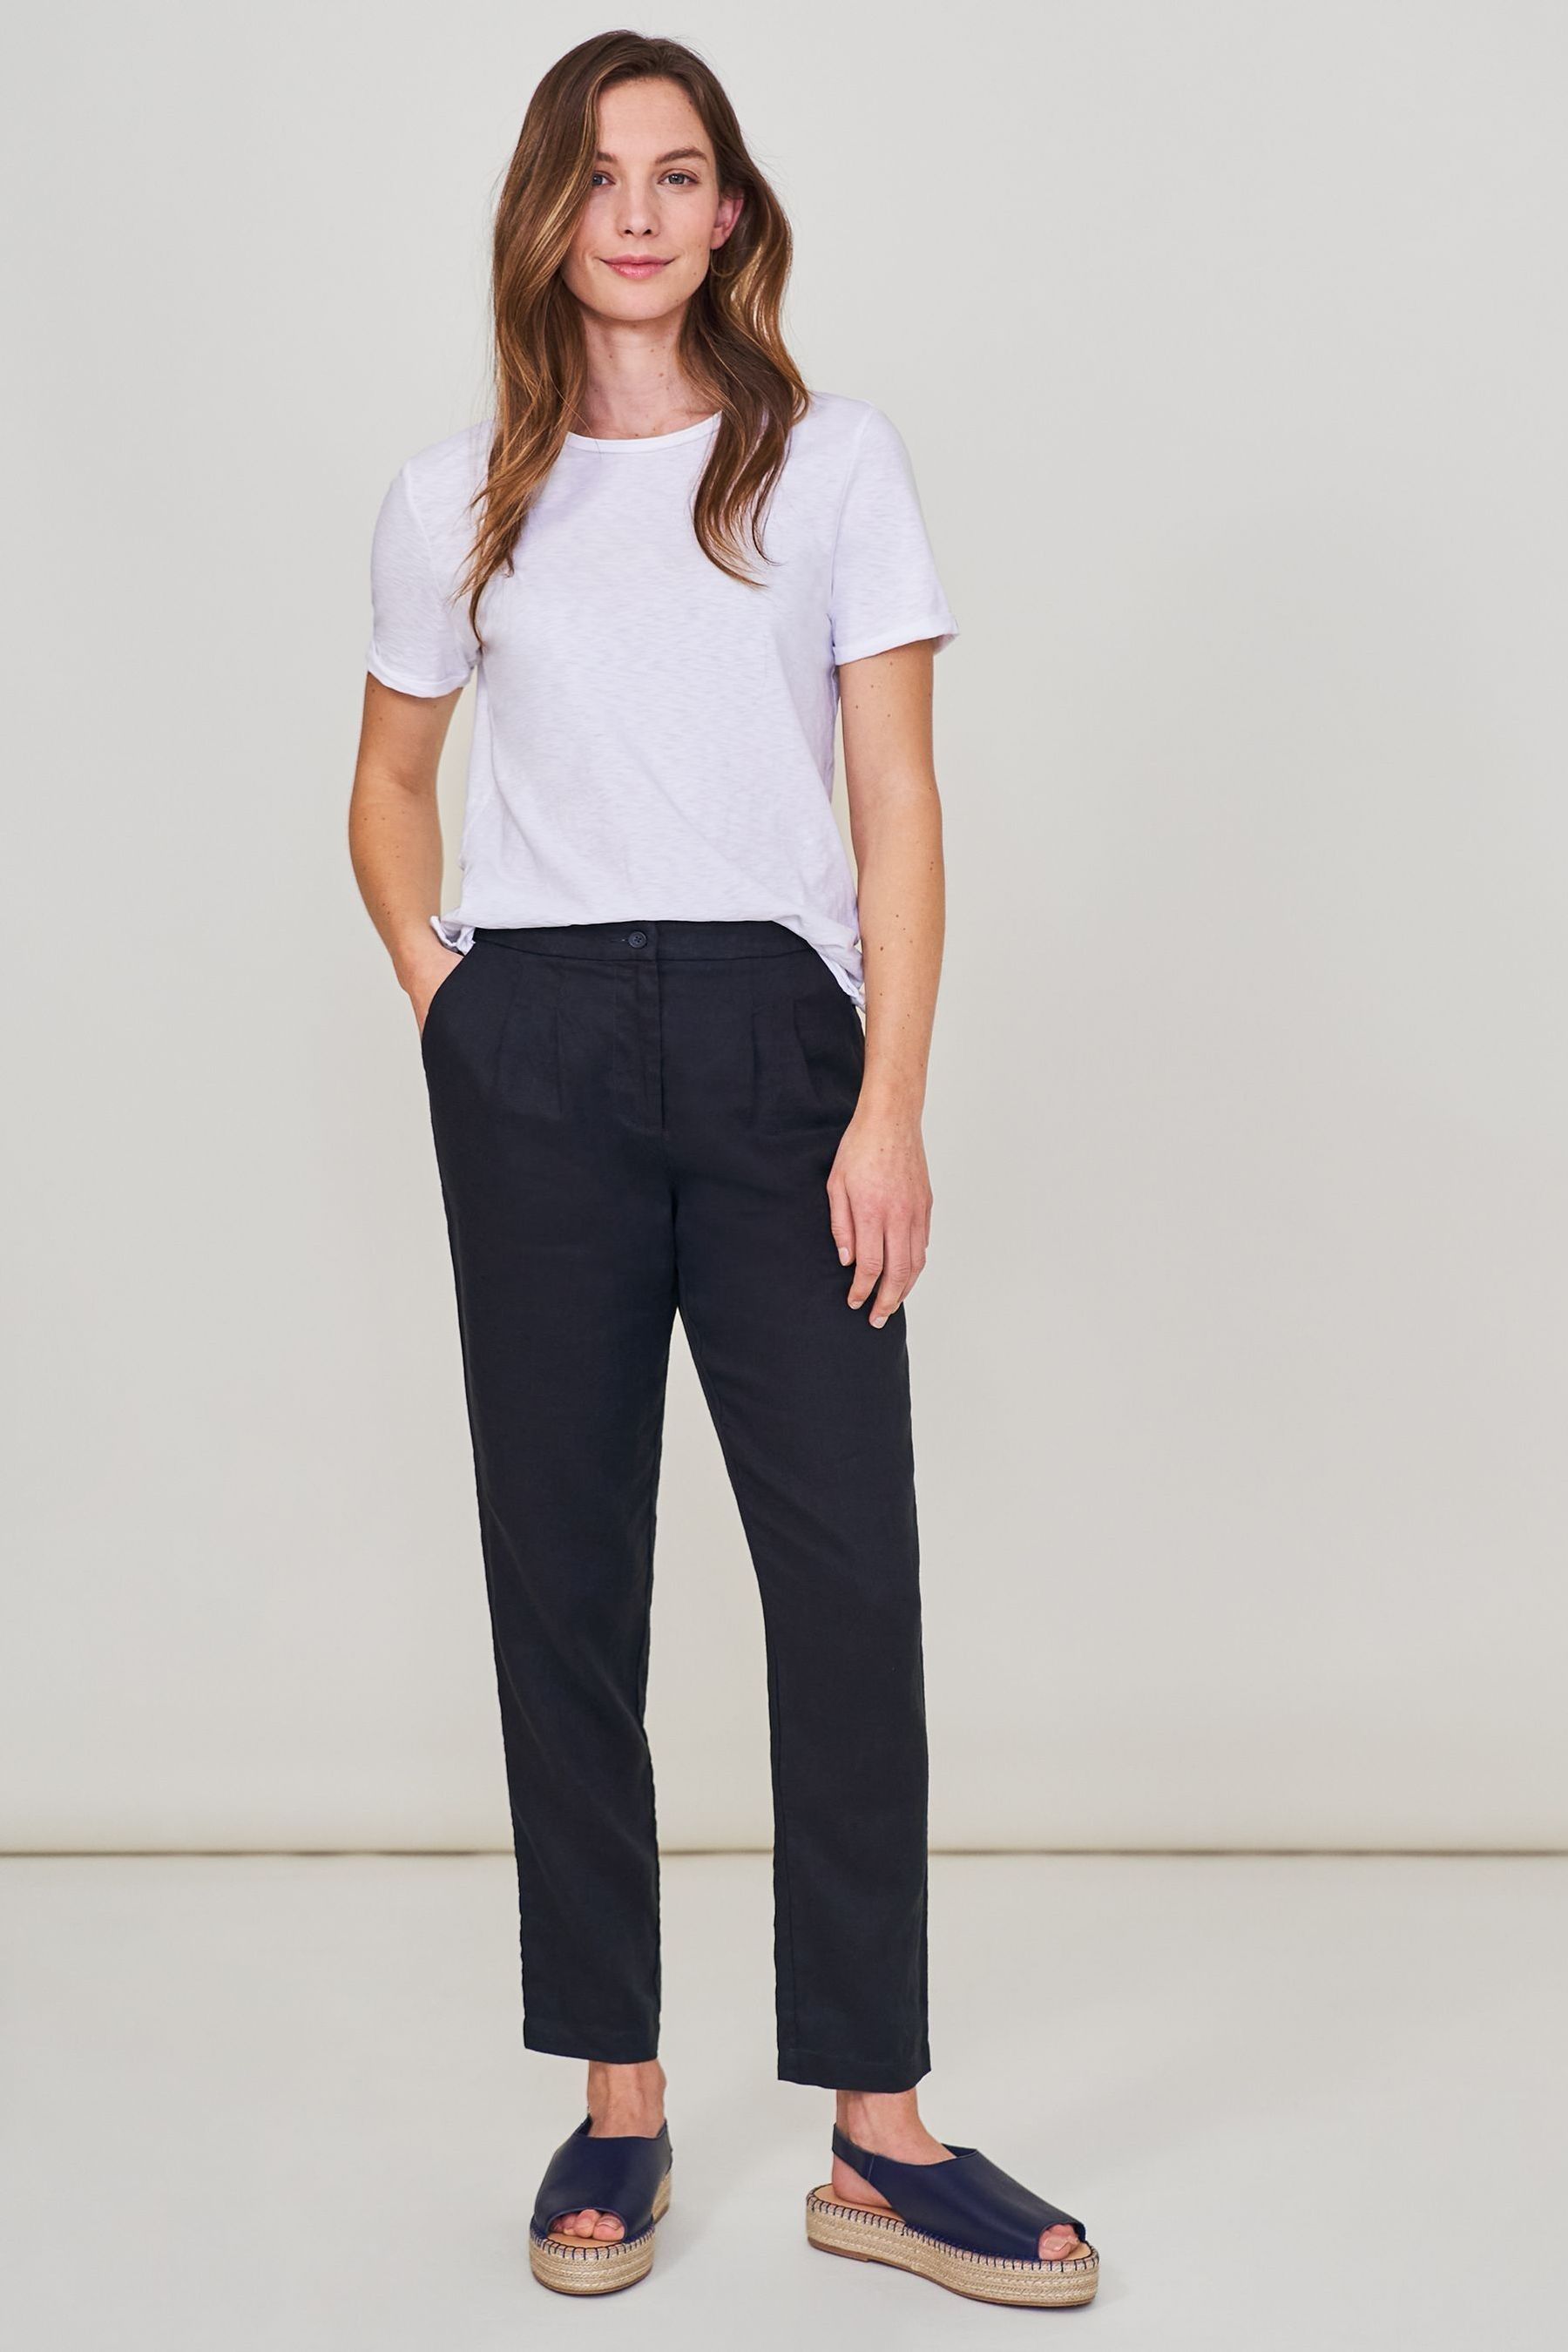 Buy White Stuff Navy Maddie Linen Trousers from Next Ireland